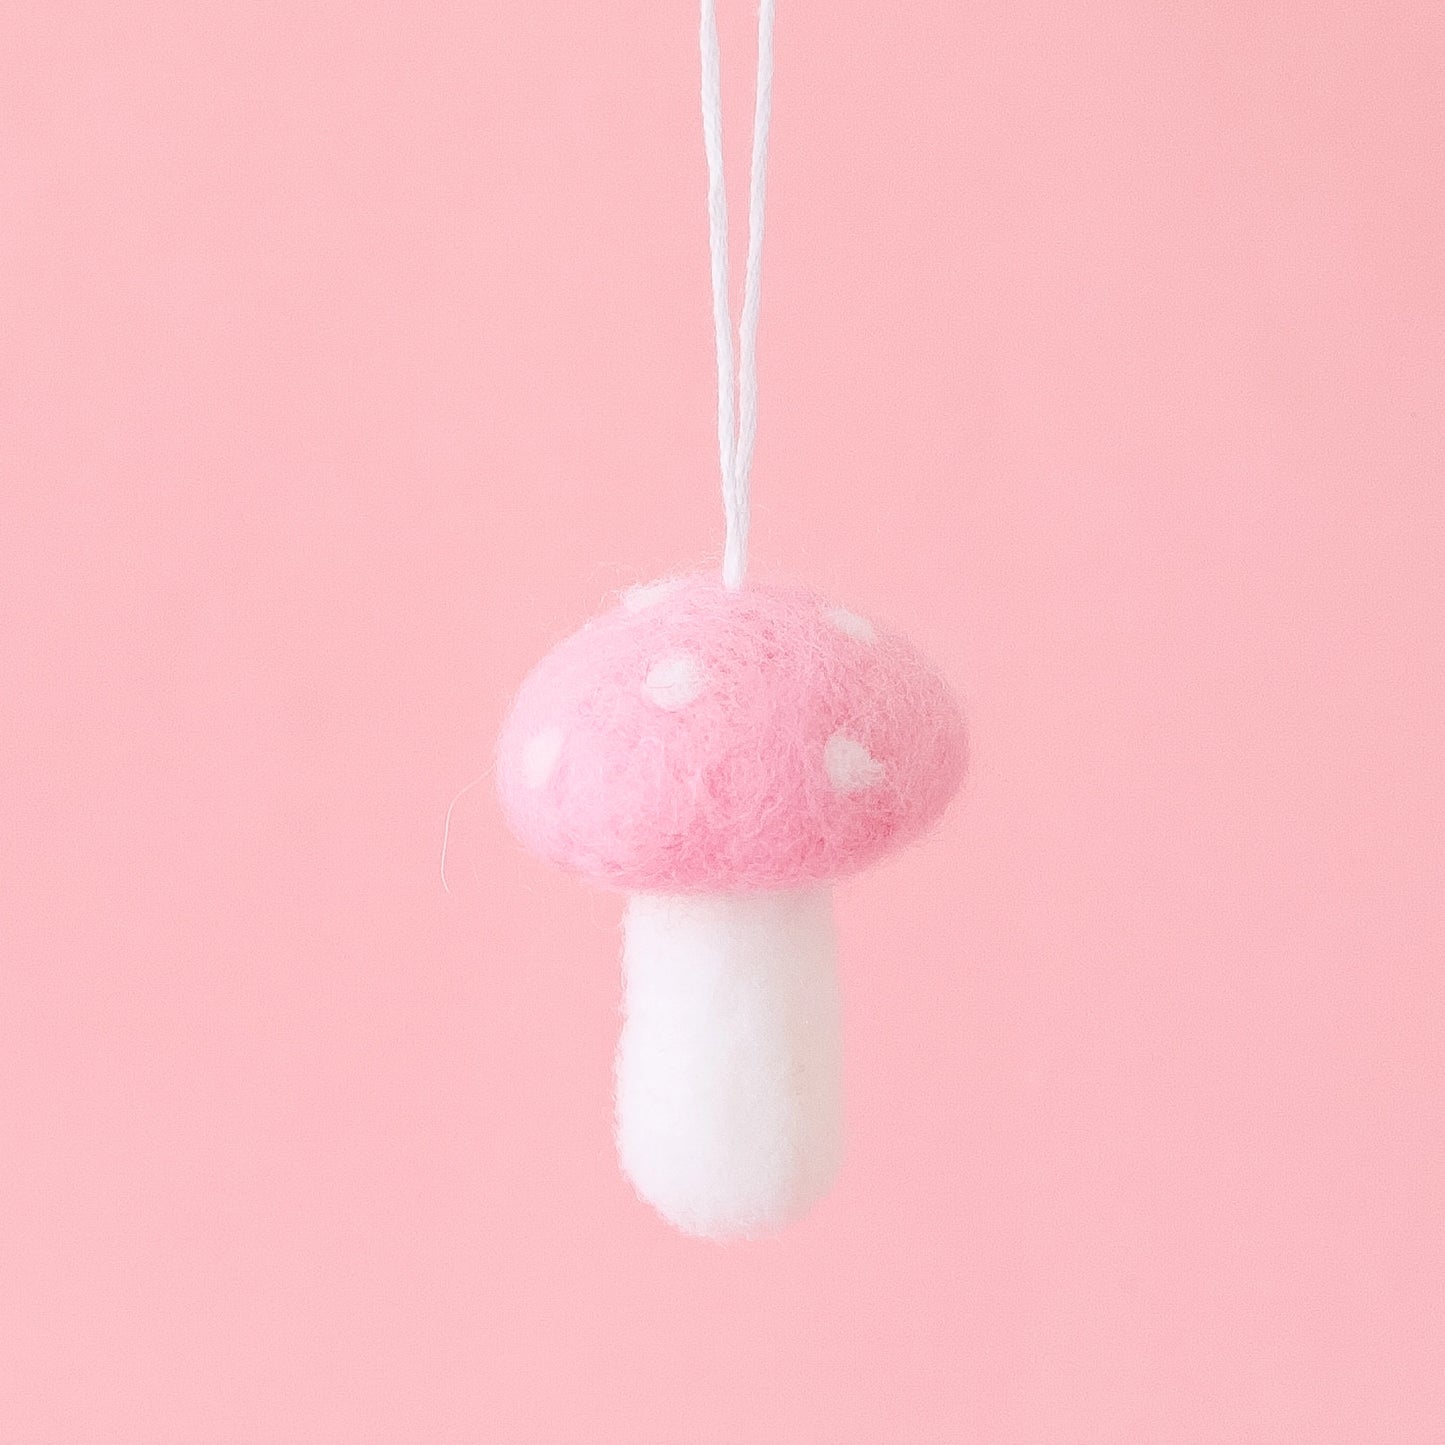 On a pink background is a felt mushroom ornament with a light pink top and cream accents.